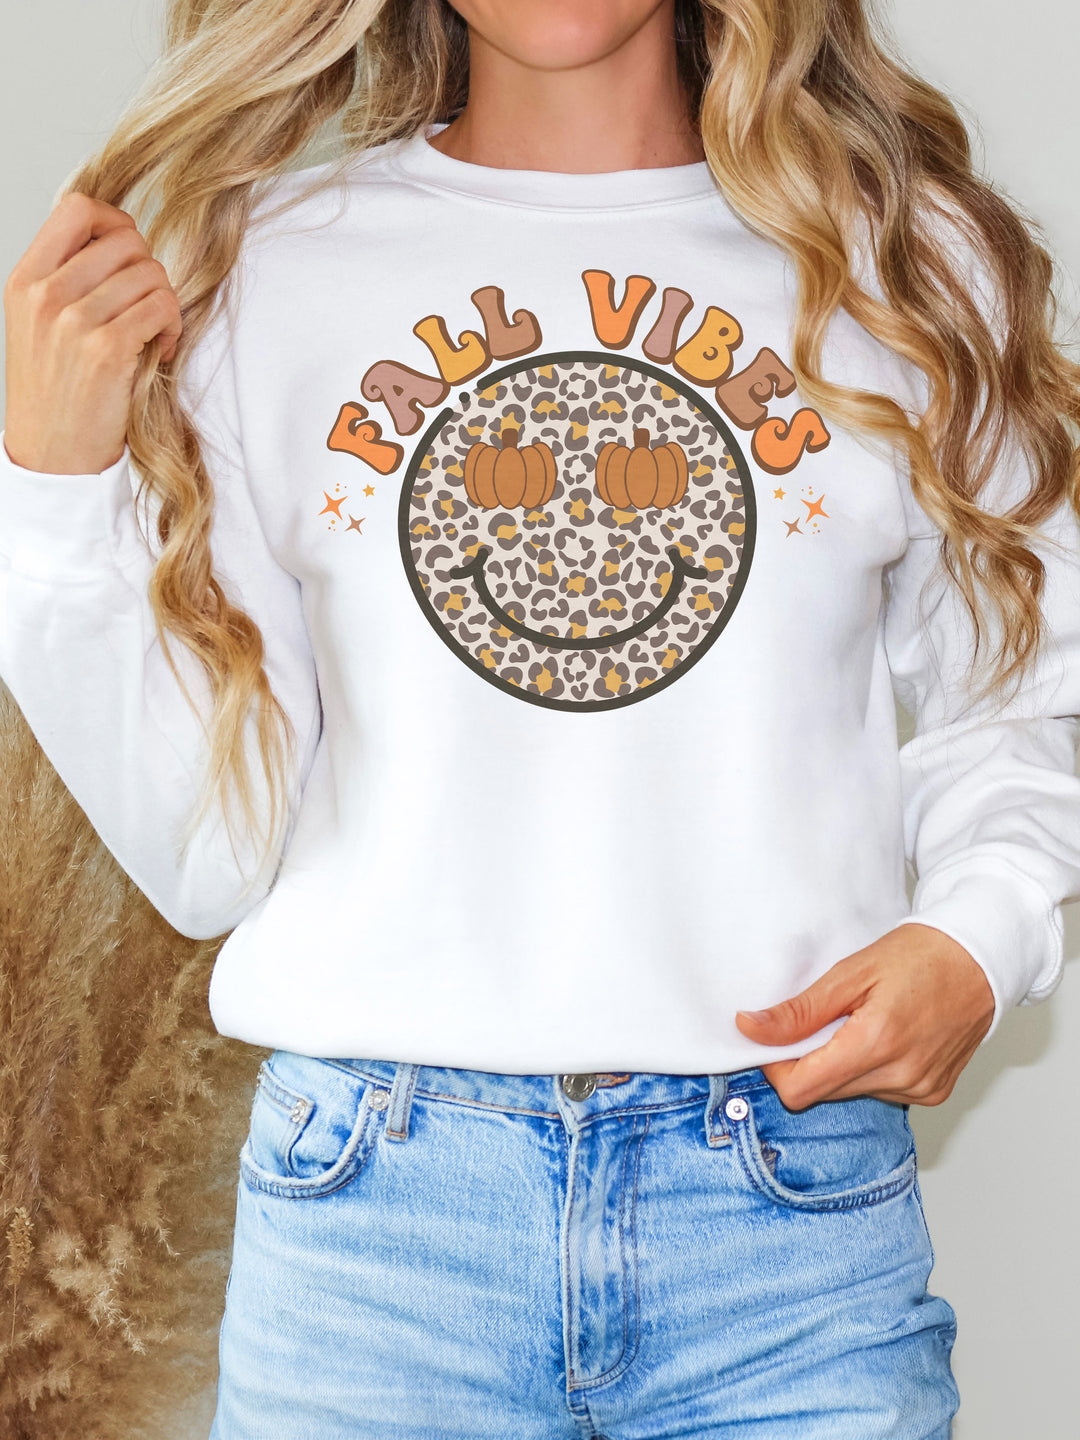 Glamfox - Fall Vibes Smiley Graphic Sweater